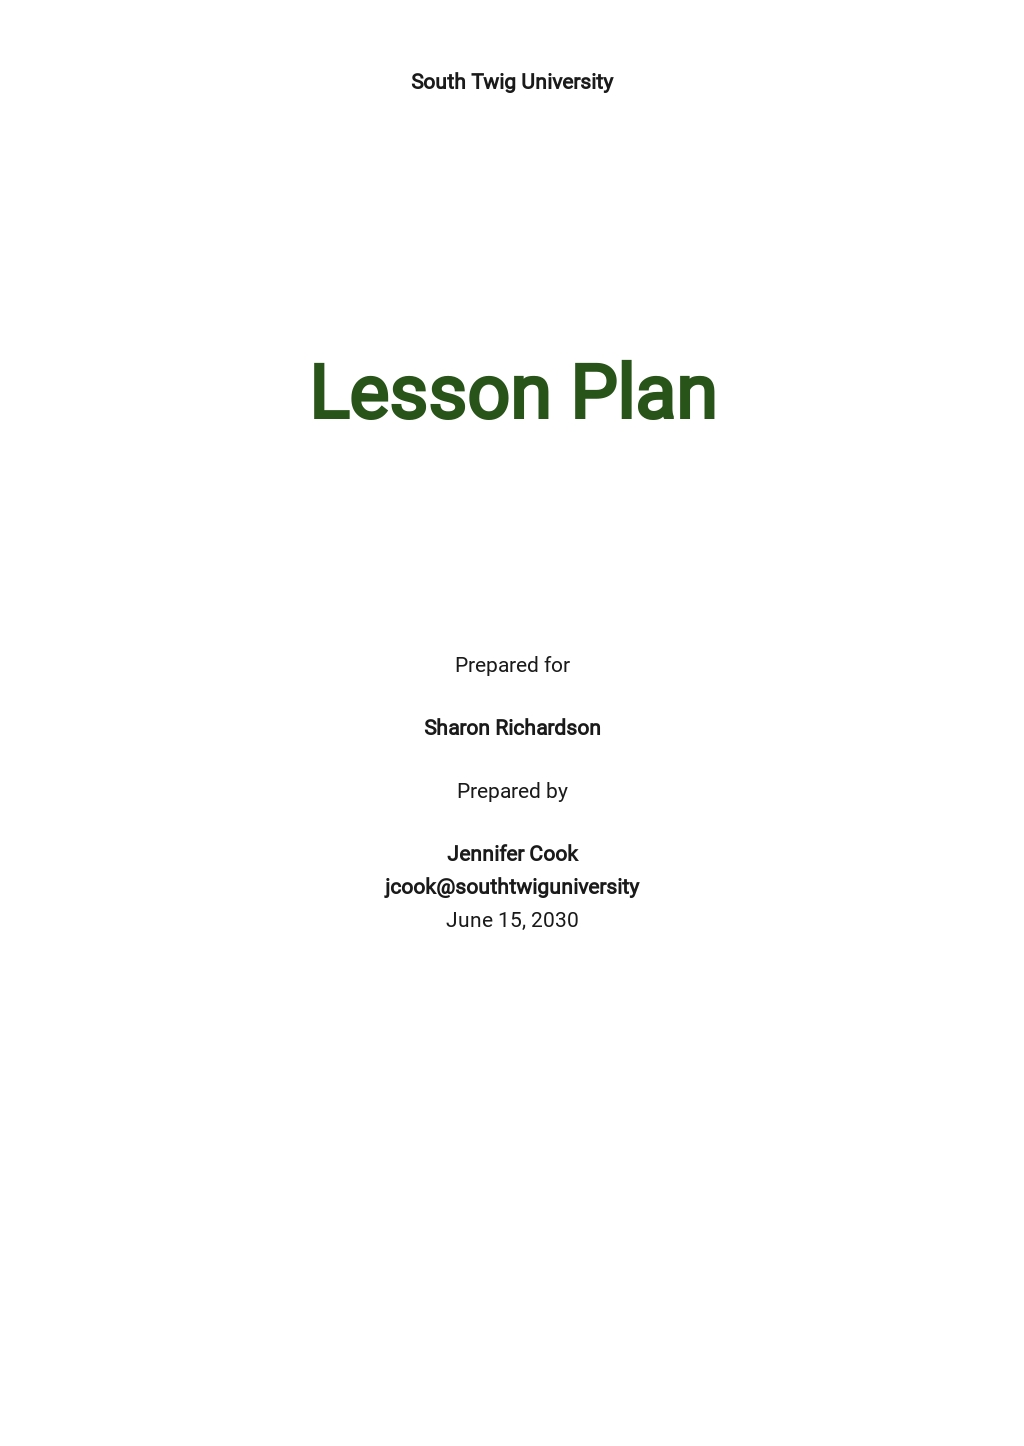 Lesson Plan Outline Template.jpe